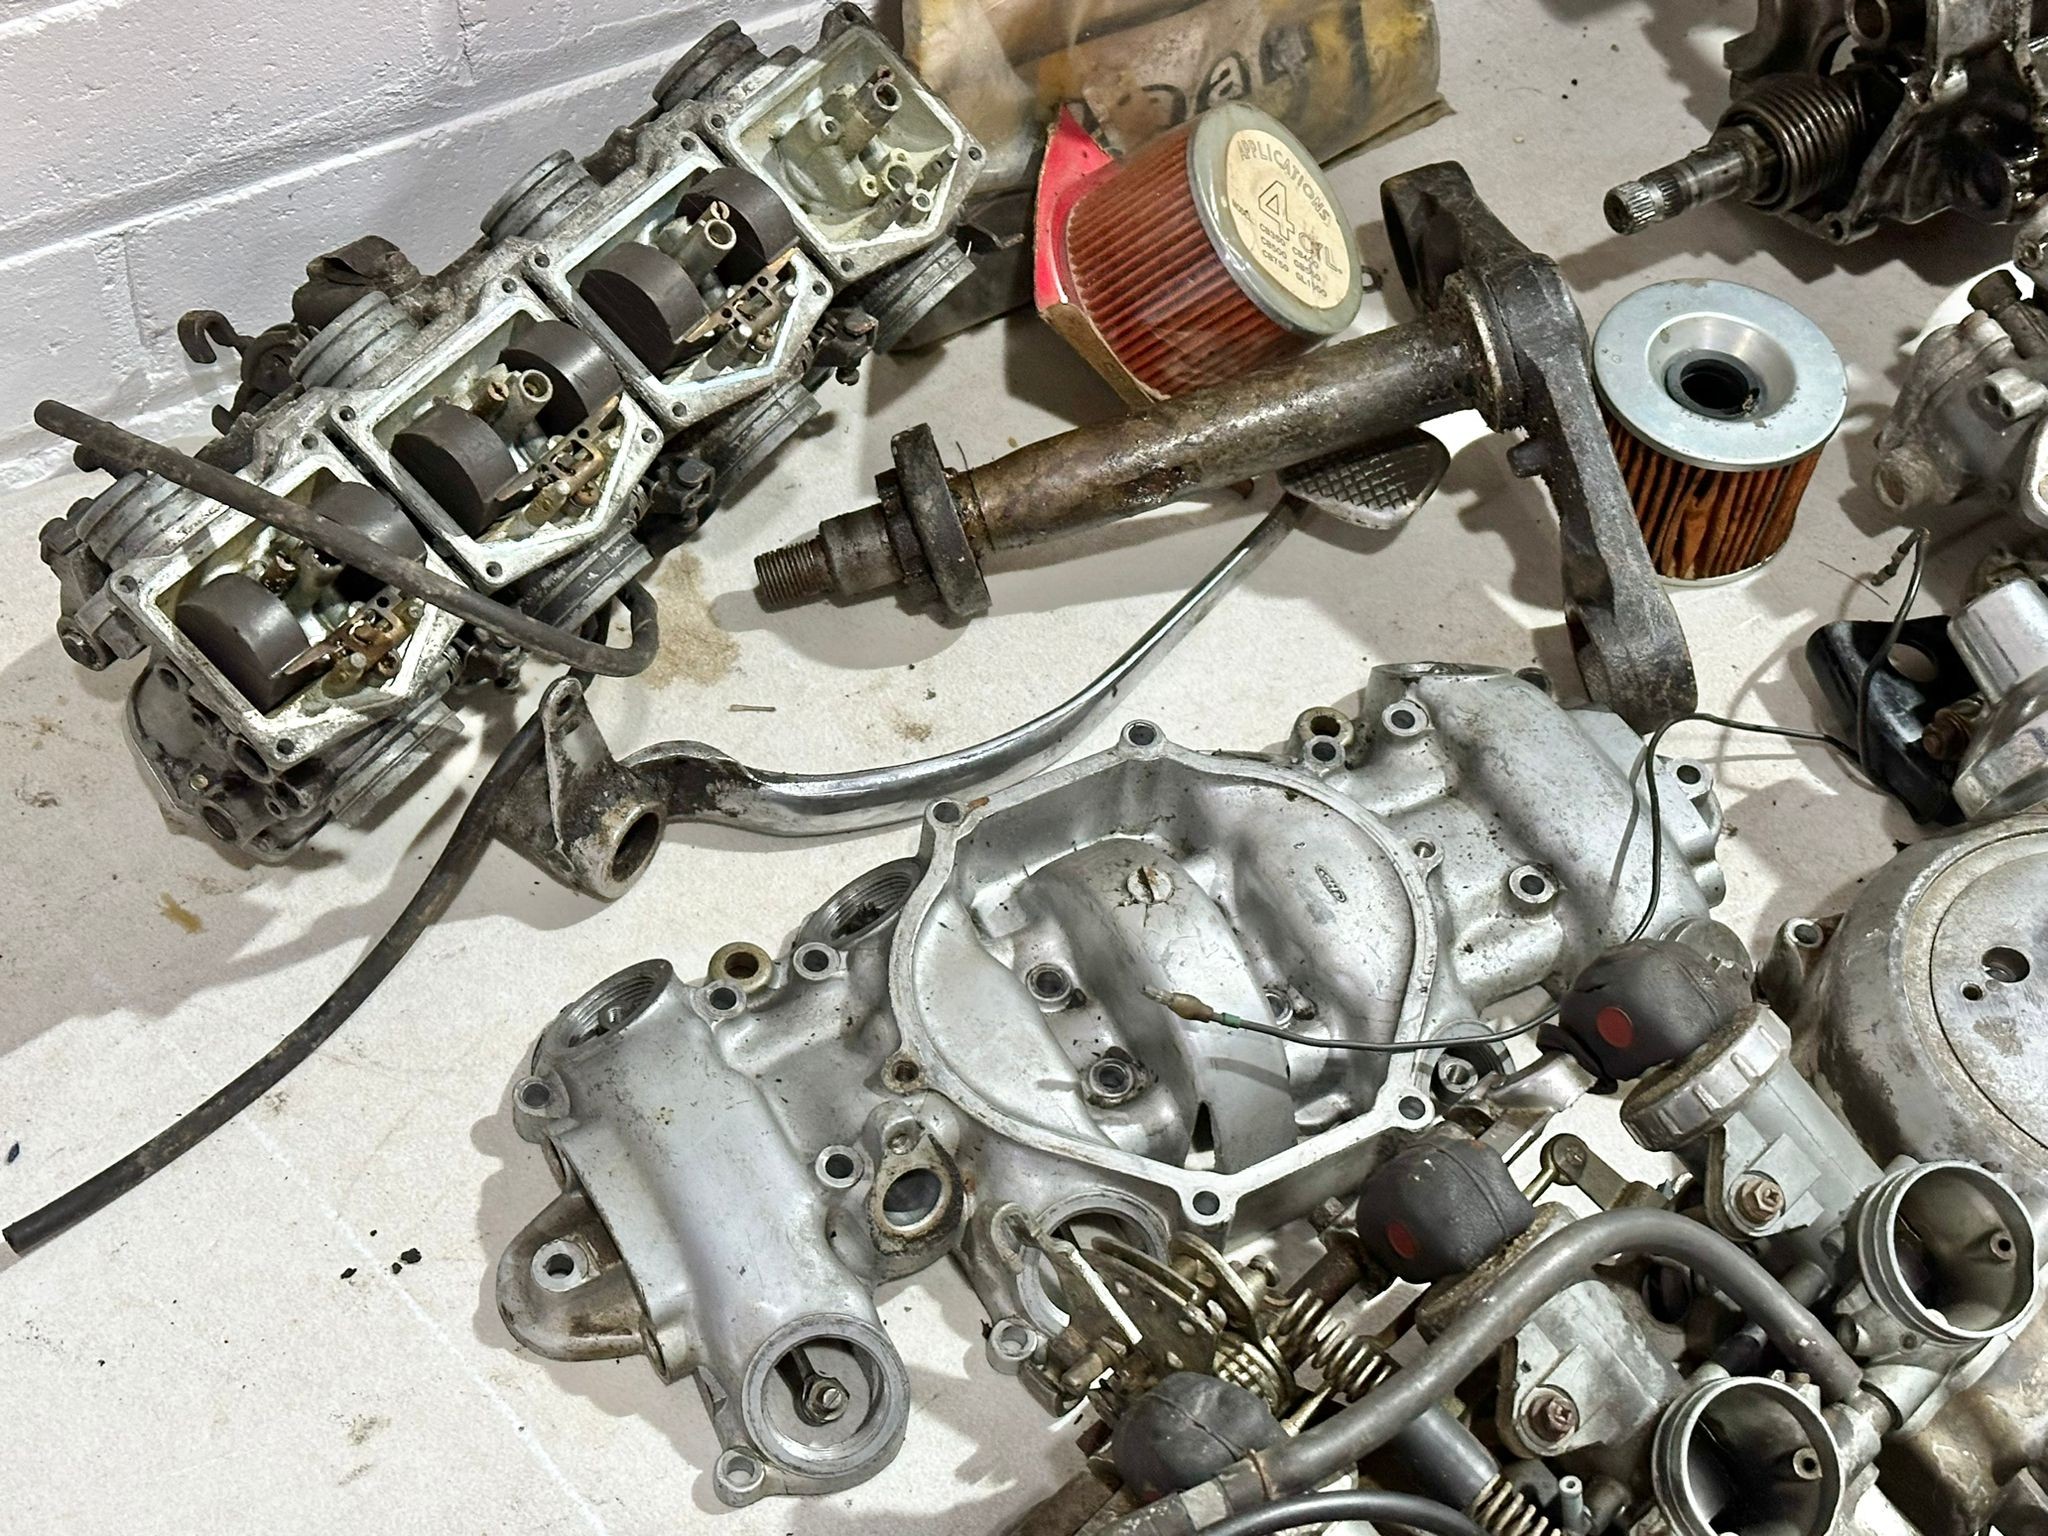 Honda CB500-4 parts with engine - Image 9 of 20